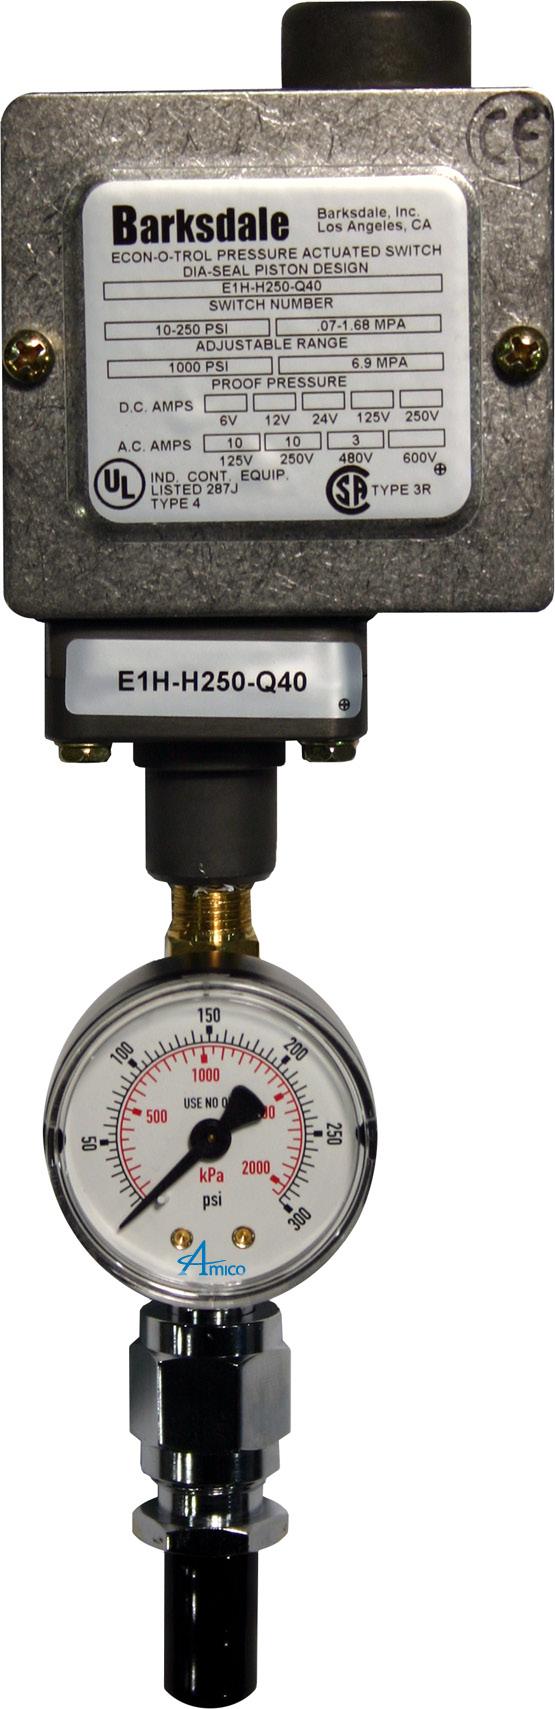 Pressure Switch With Gauge For Nitrogen / Air and Oxygen Reserve General Specifications: Pressure switch with gauge assembly for the medical gas alarm system shall incorporate a U.L.